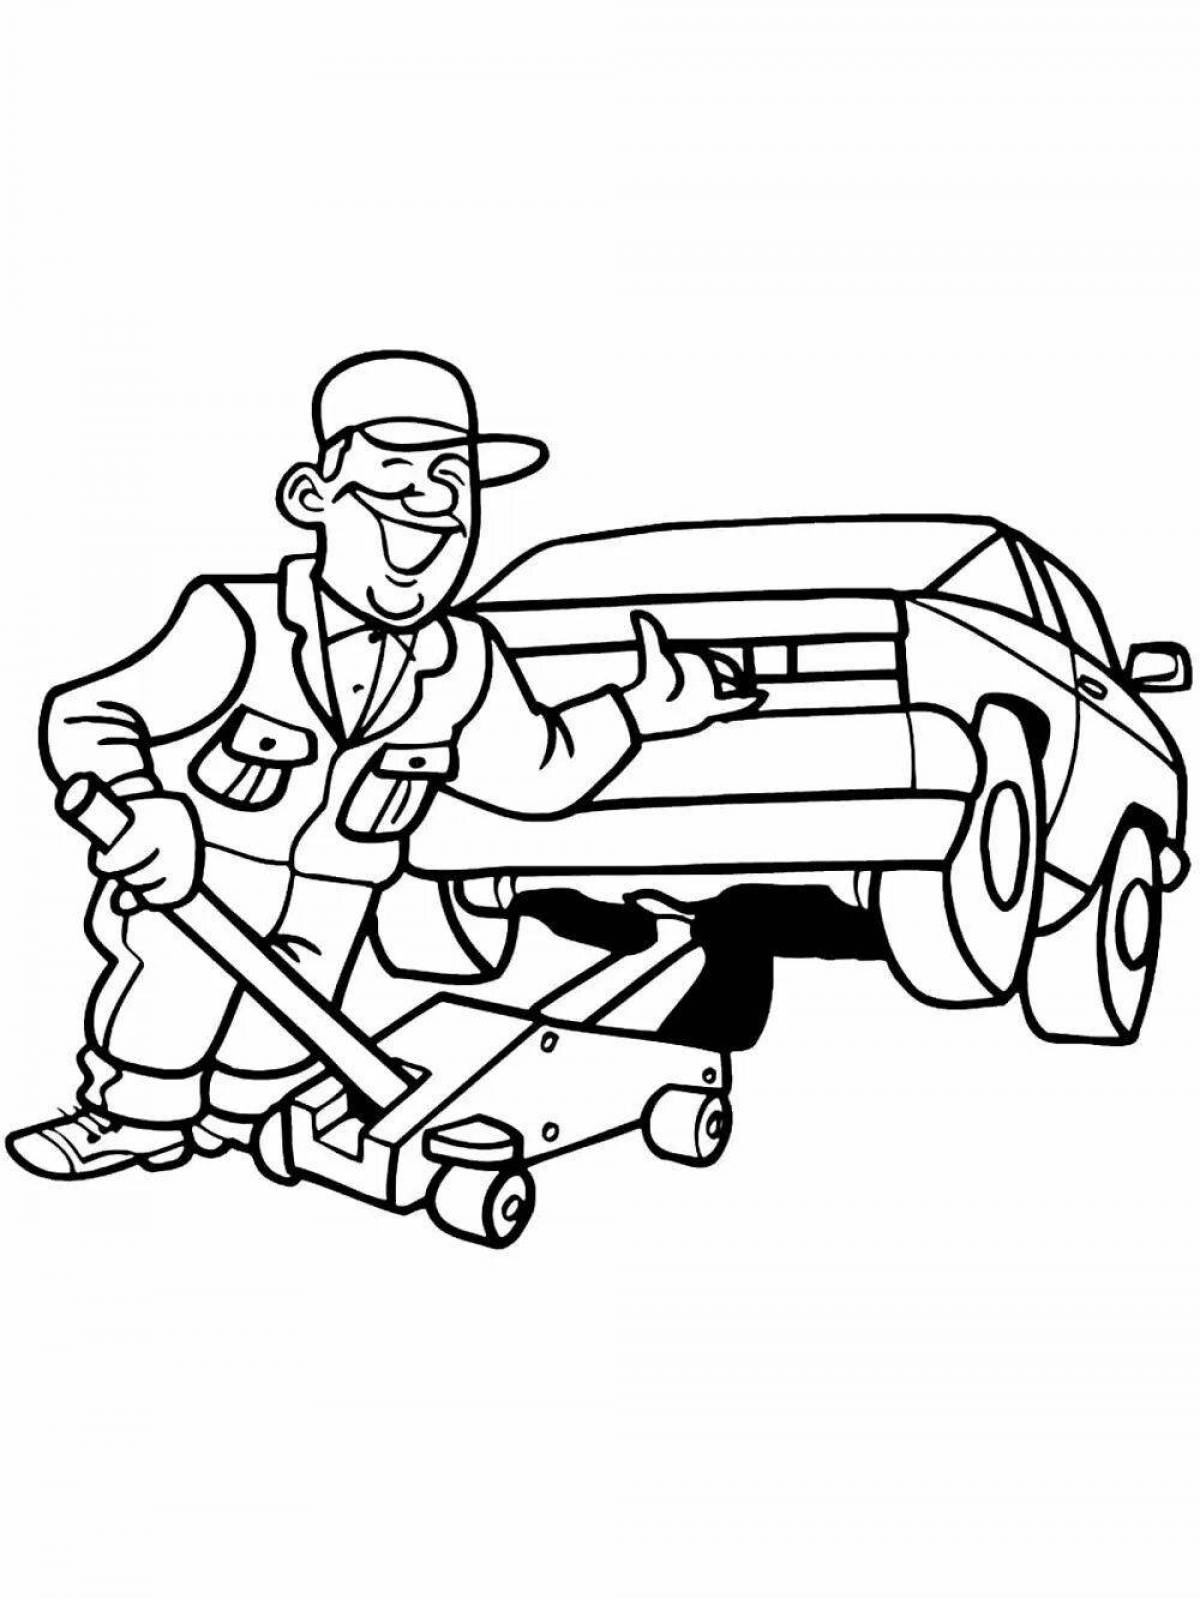 Innovative auto mechanic coloring book for kids